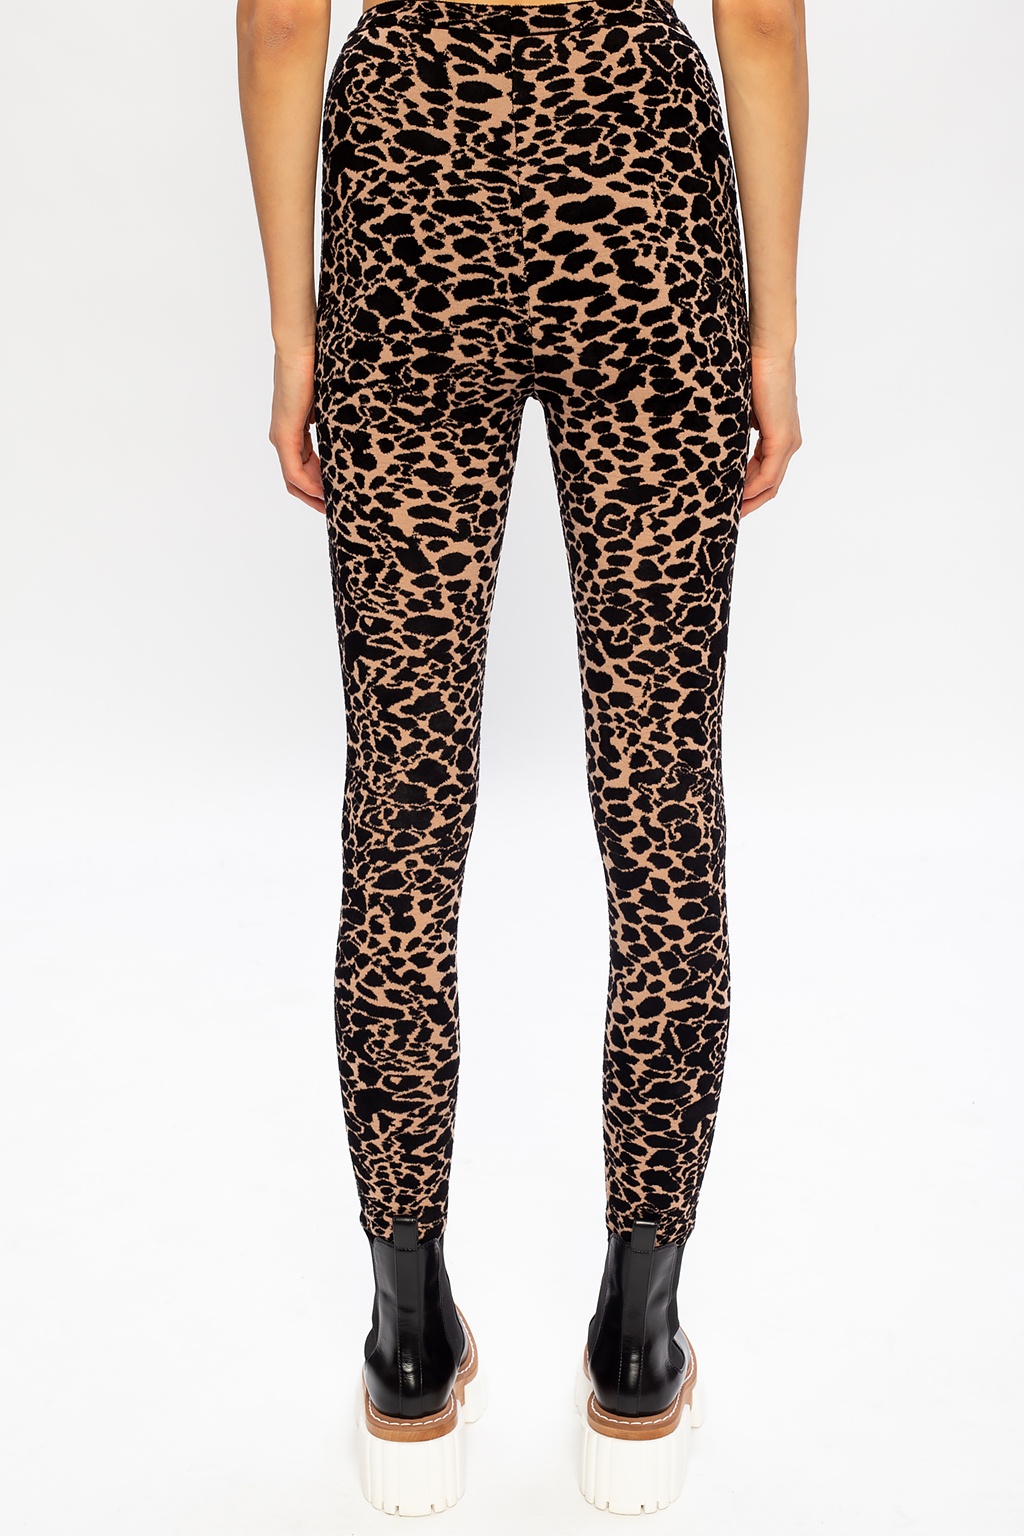 Alaia Patterned Club trousers